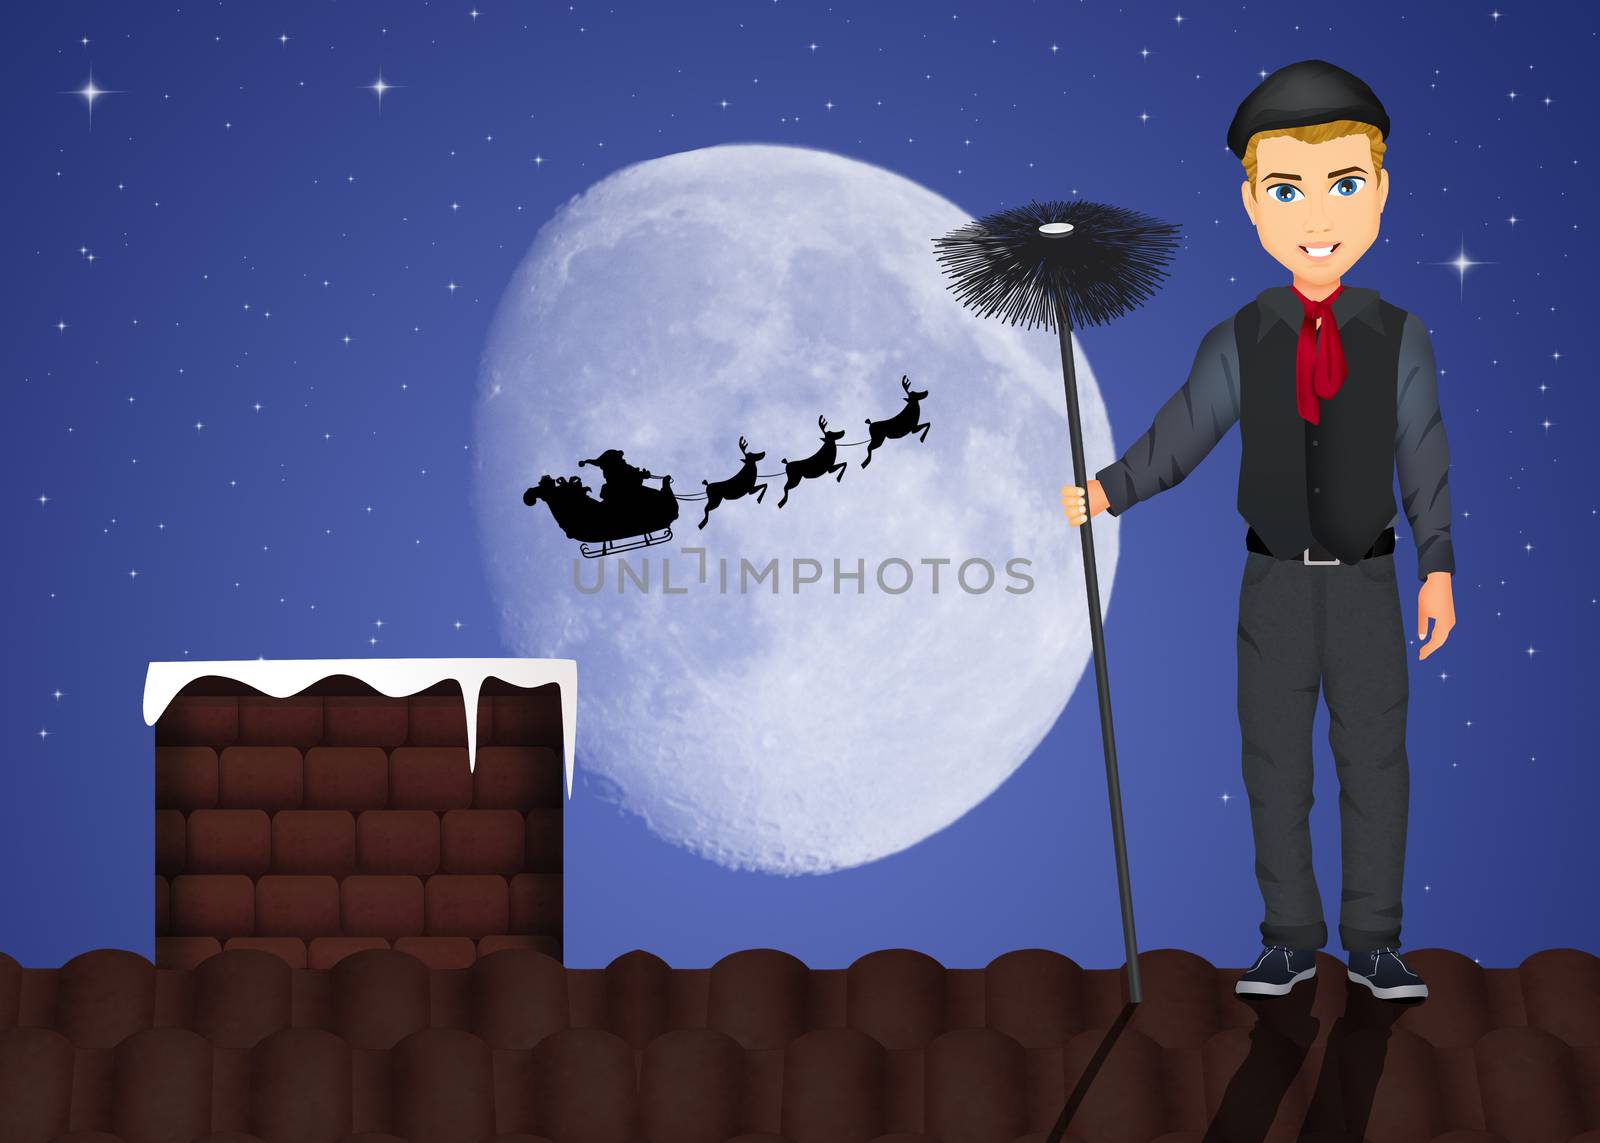 illustration of chimney sweep cleans the fireplace for Santa Claus